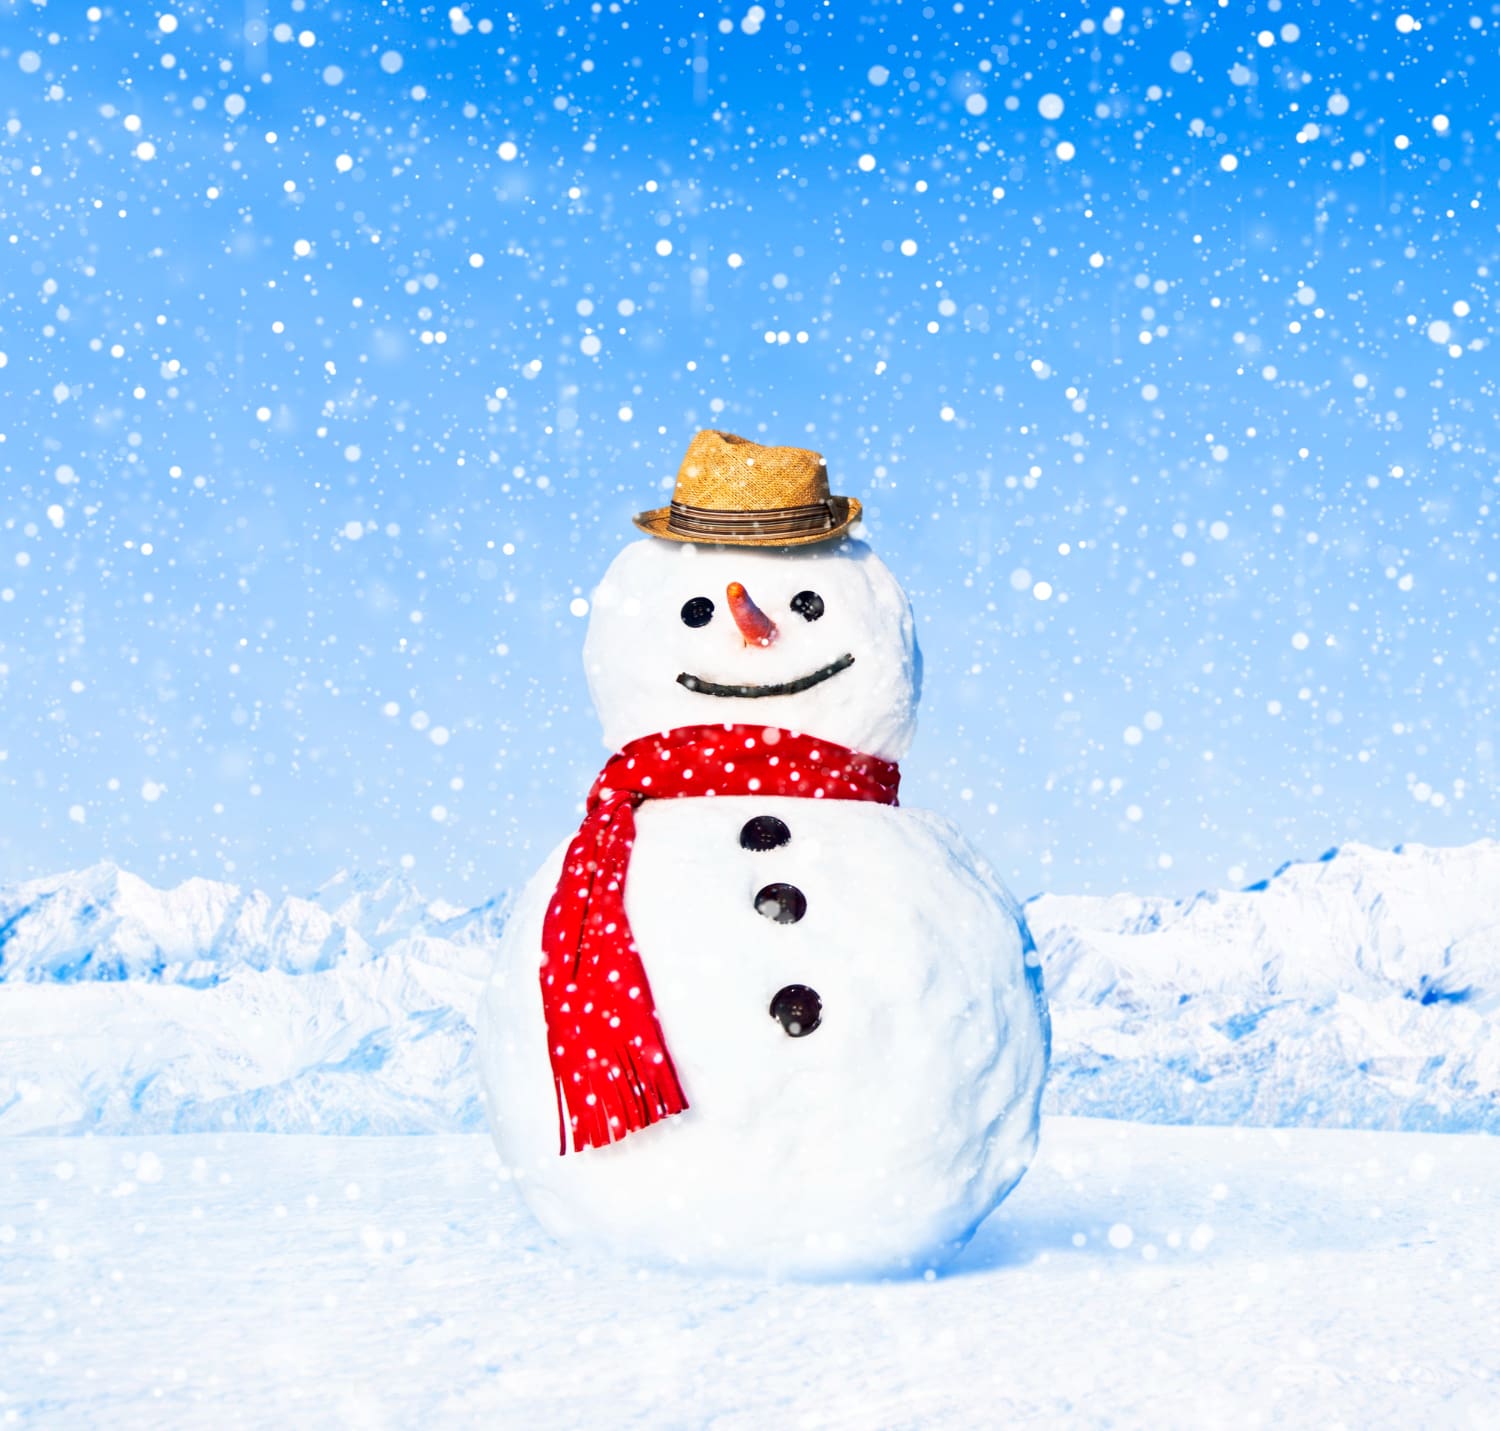 real snowman outdoors white scenery